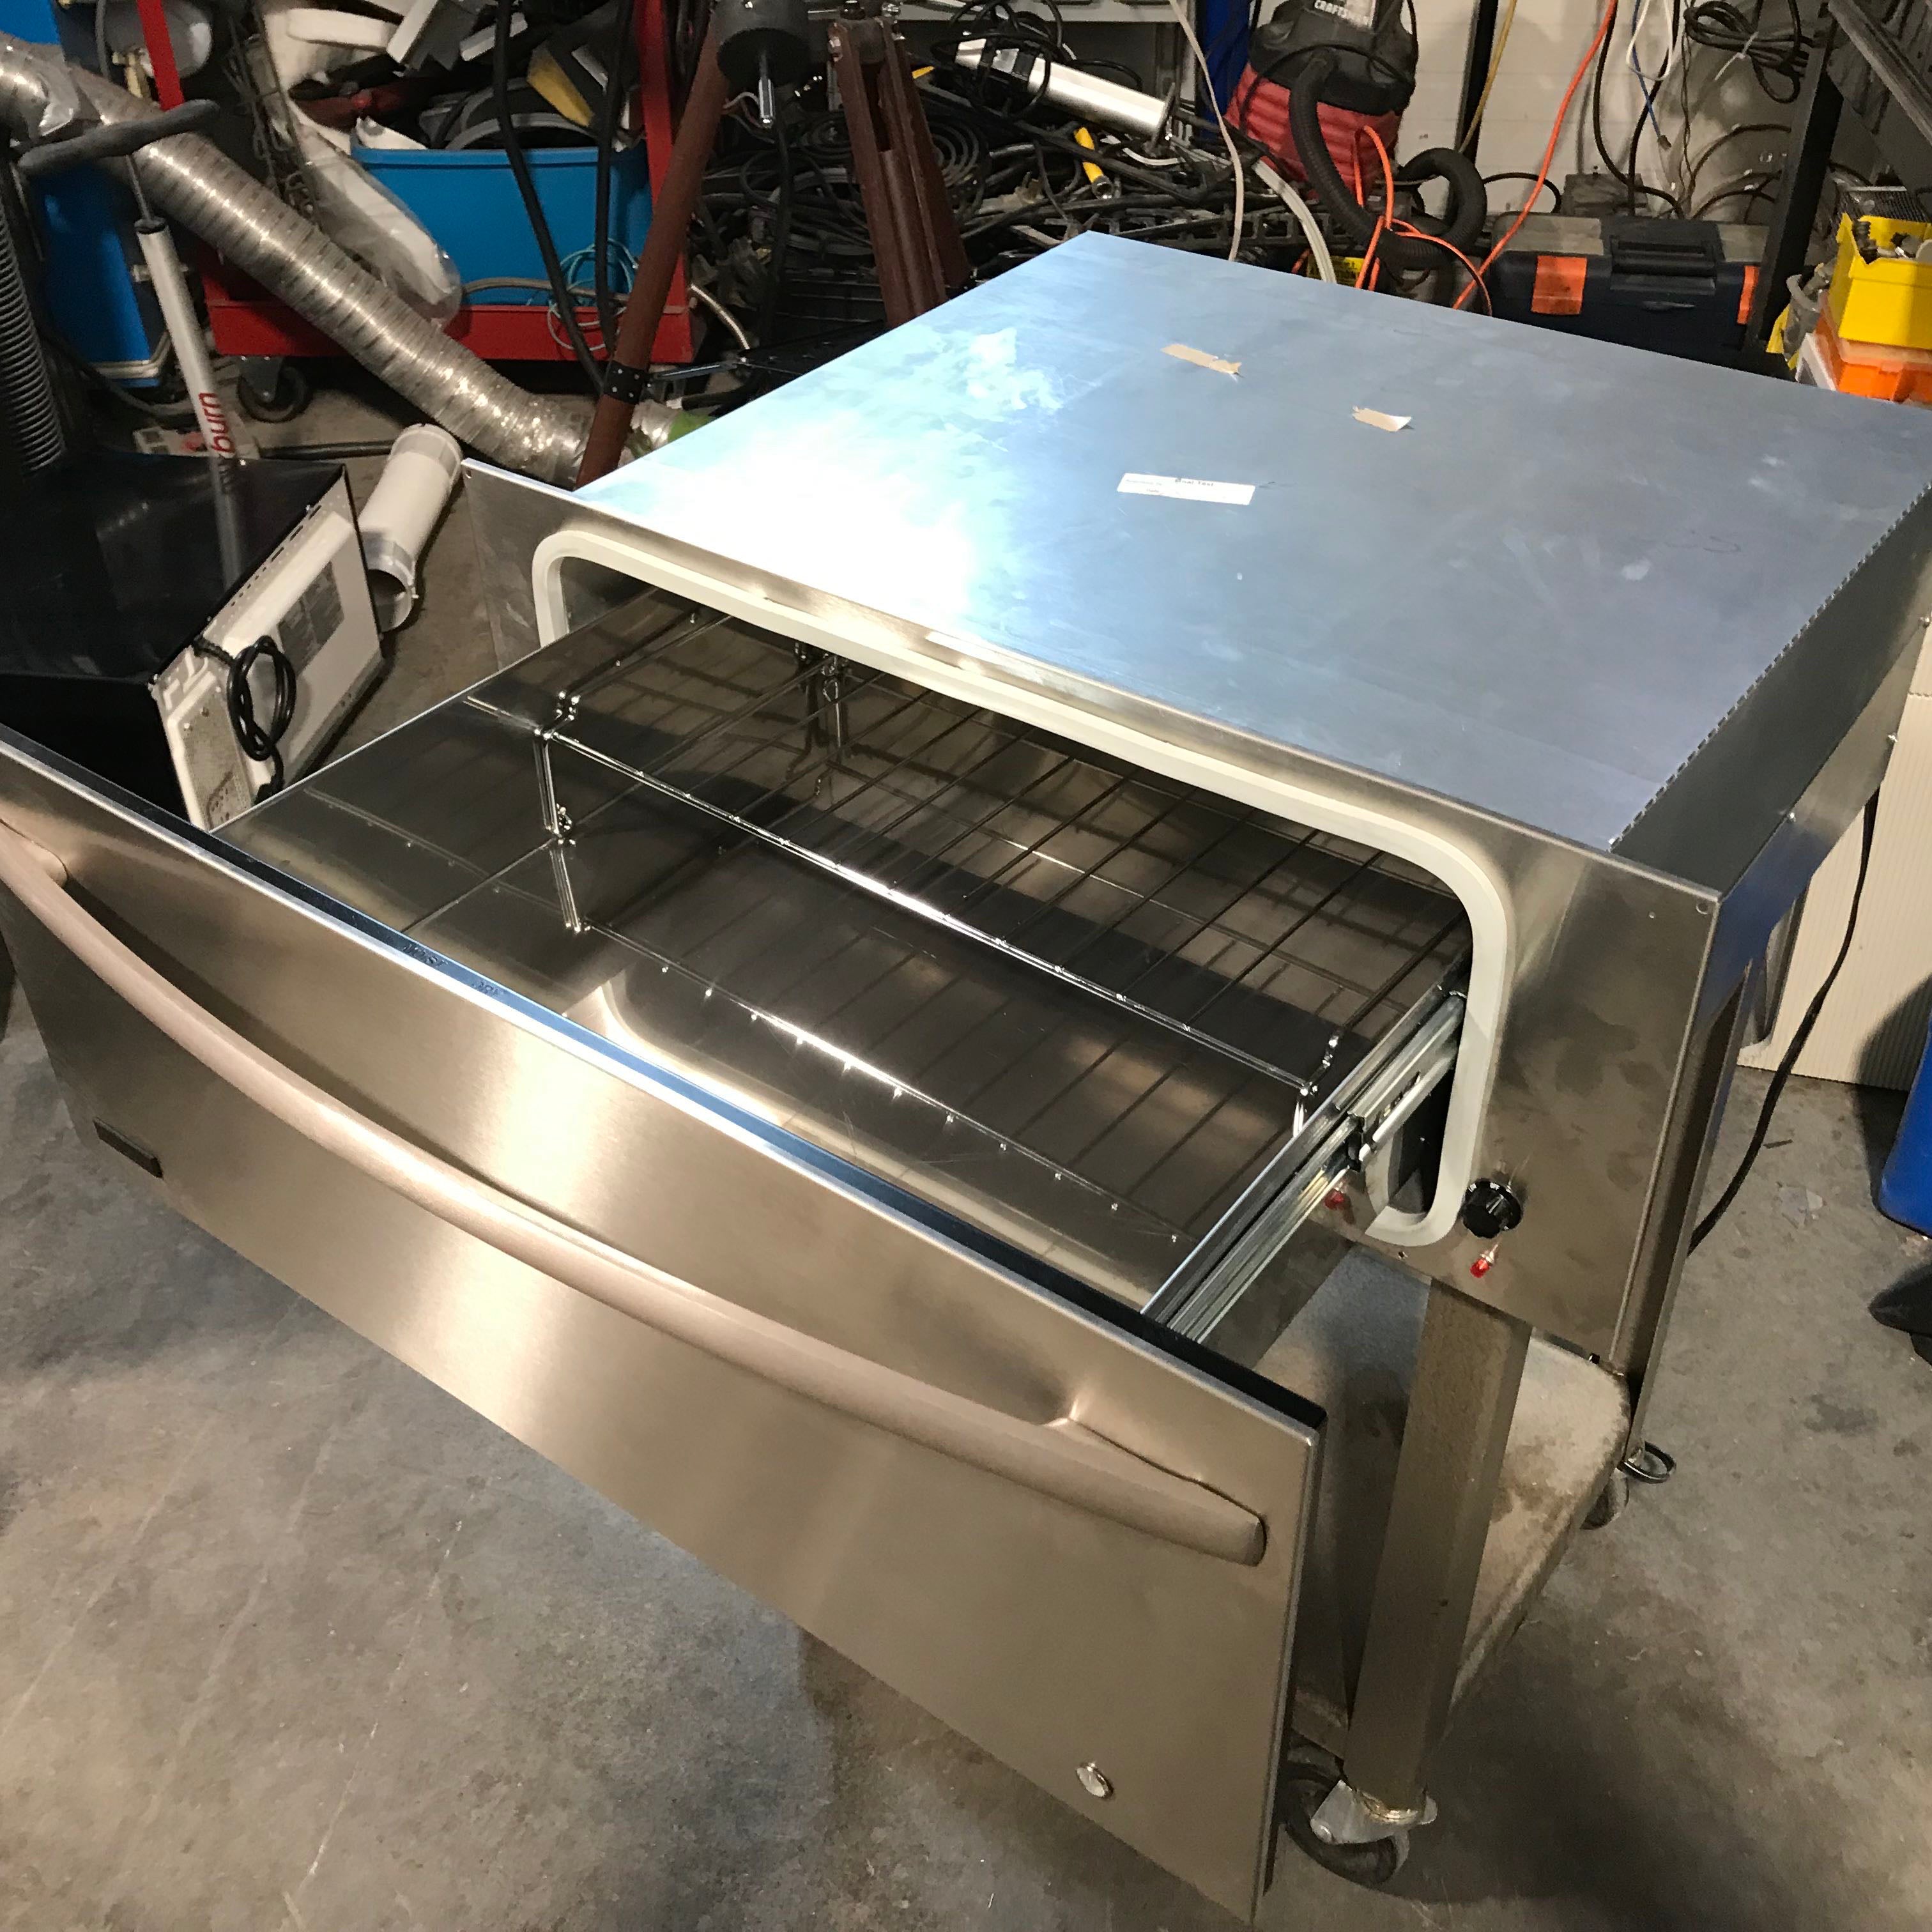 Thermador Stainless Steel Warming Drawer